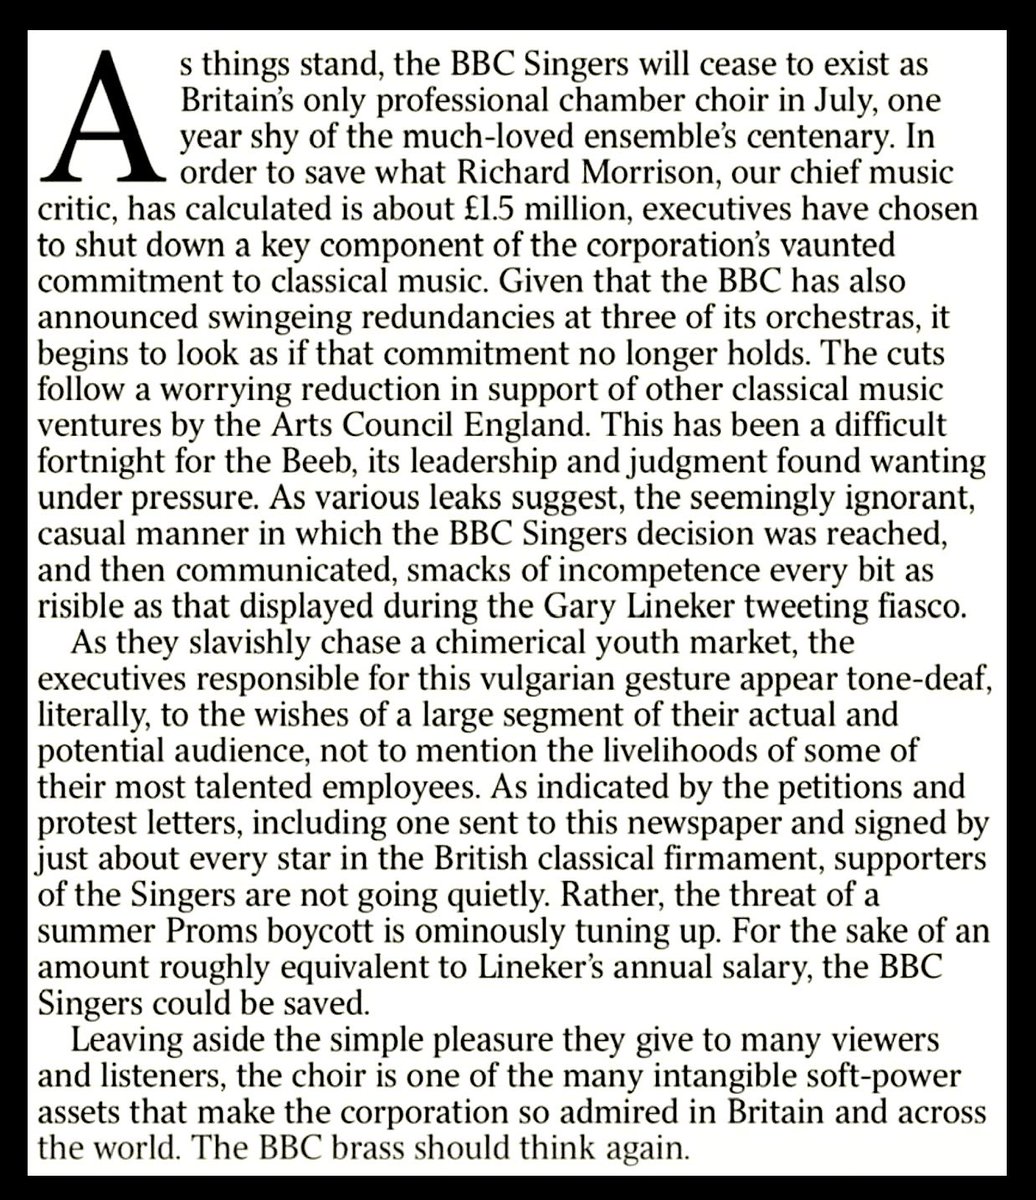 From The Times: “the seemingly ignorant manner in which the @BBCSingers decision was reached, and then communicated, smacks of incompetence every bit as risible as that displayed during the Gary Lineker tweeting fiasco”. @BBCMUSIC_ @BBC #bbc